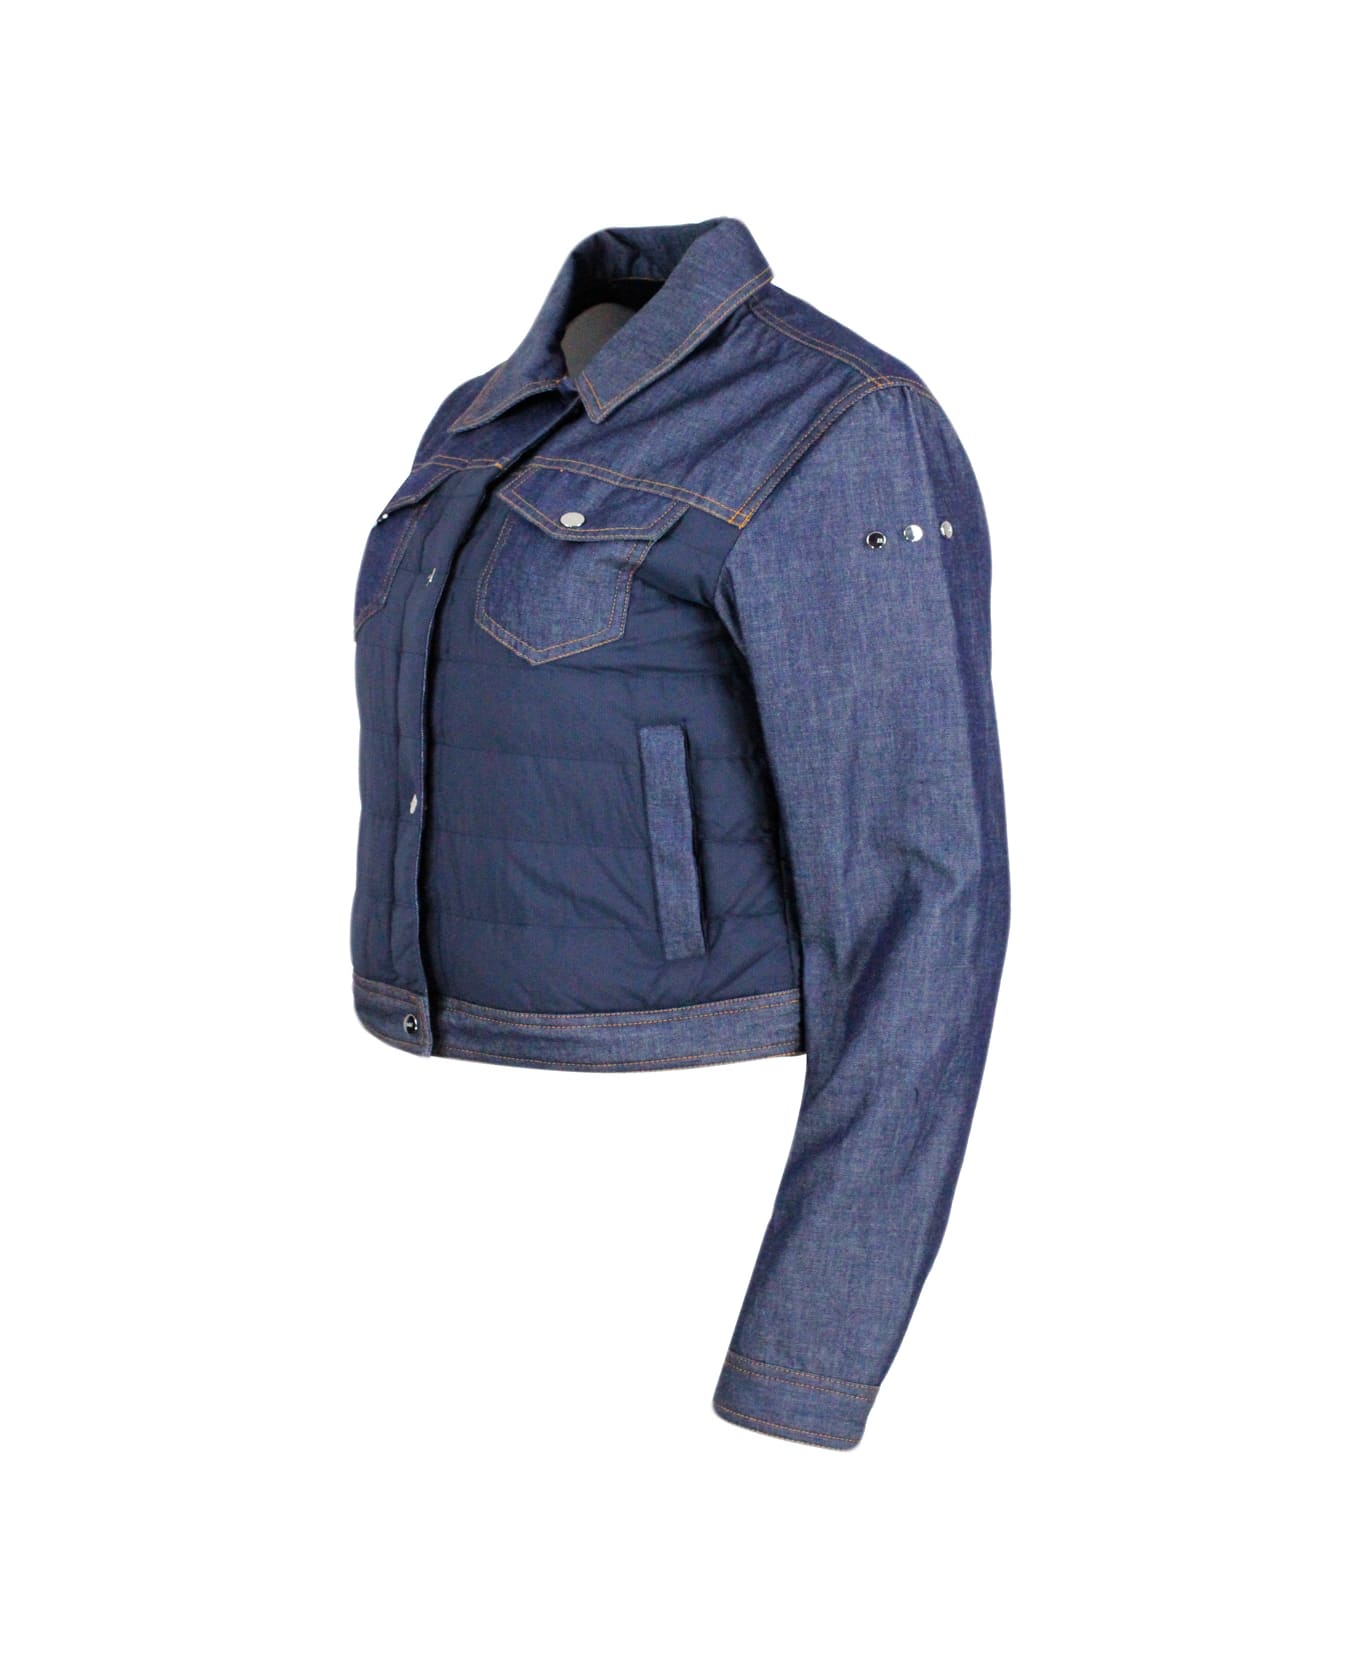 Add Jacket In Soft Denim With Lightly Padded Technical Fabric Parts And Zip Closure. - Denim ジャケット